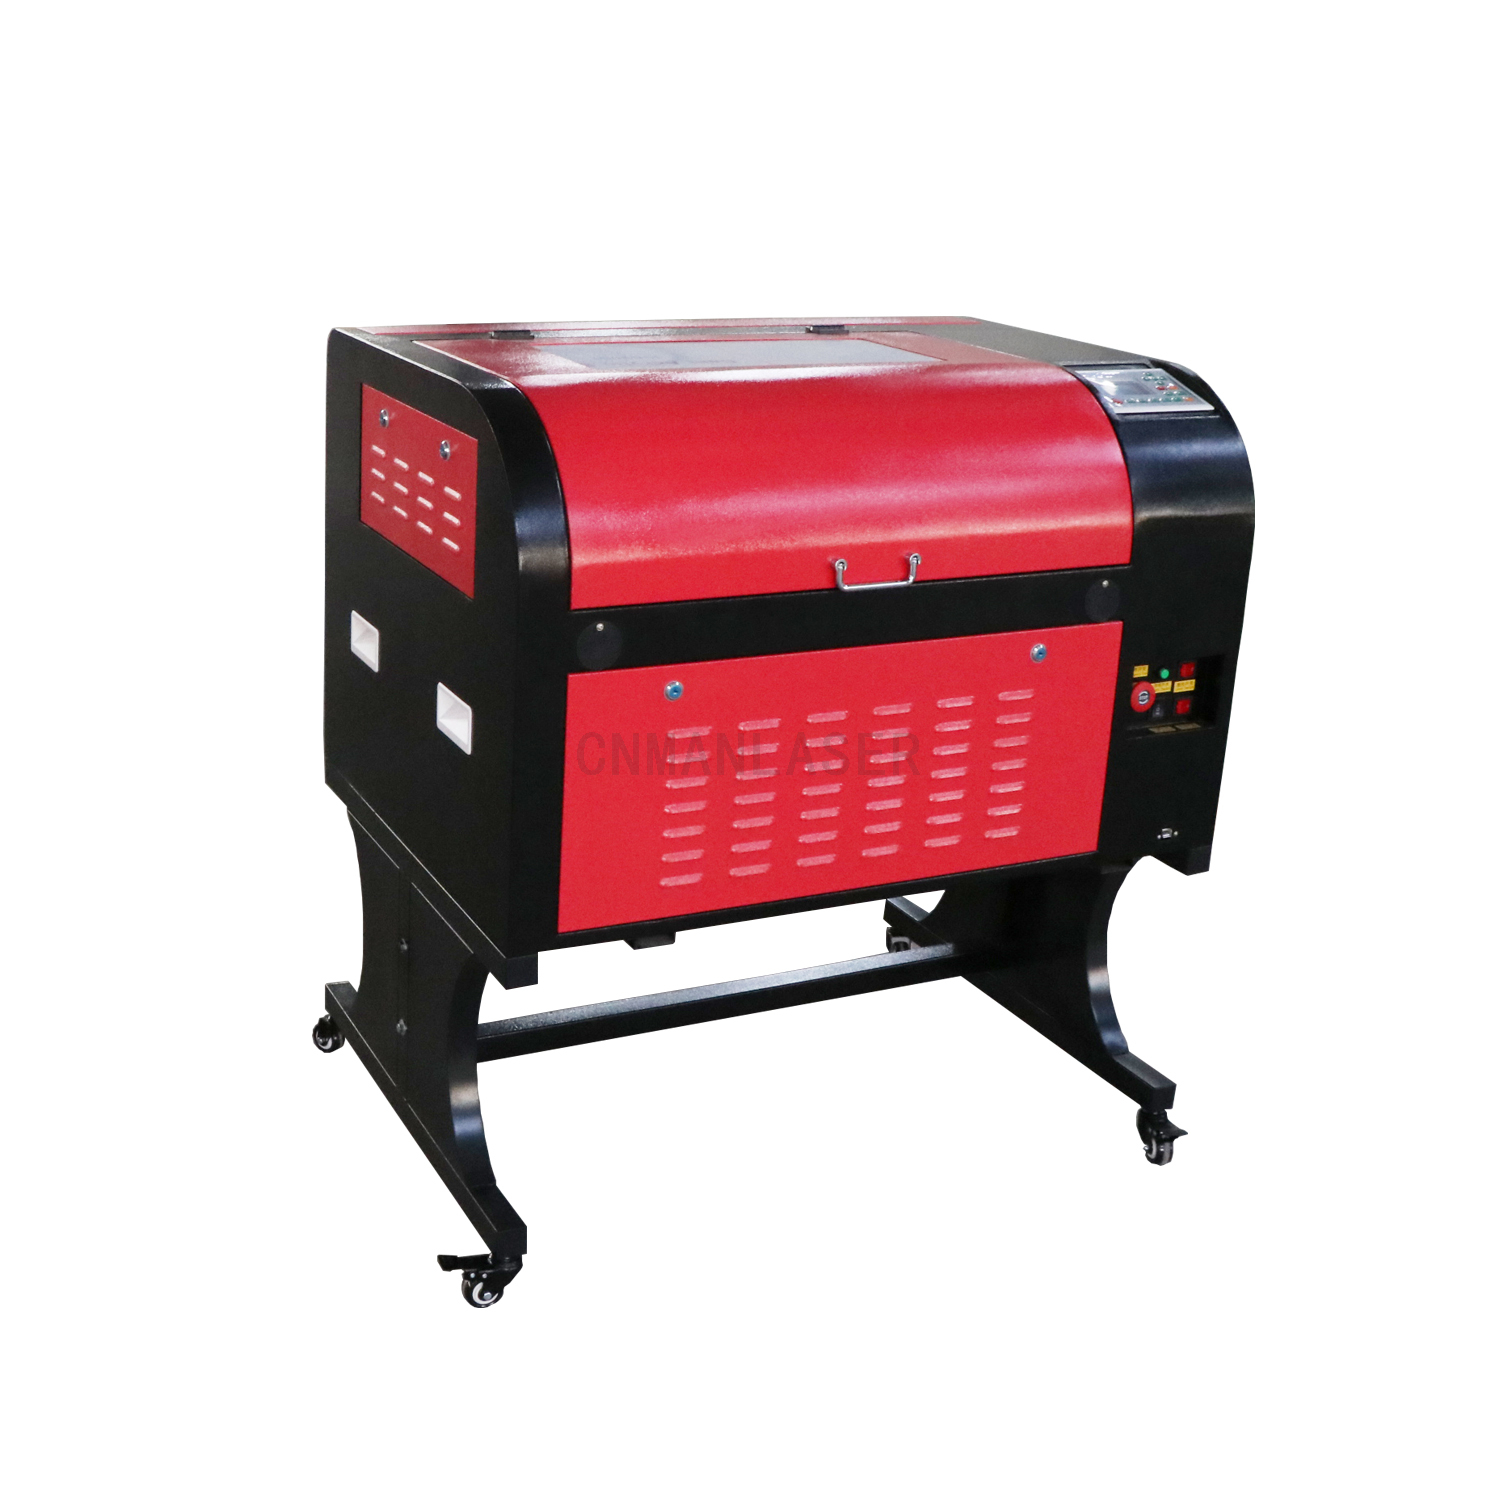 100W CO2 Laser Engraving Machine Double Laser Head with Ce Laser Cutting